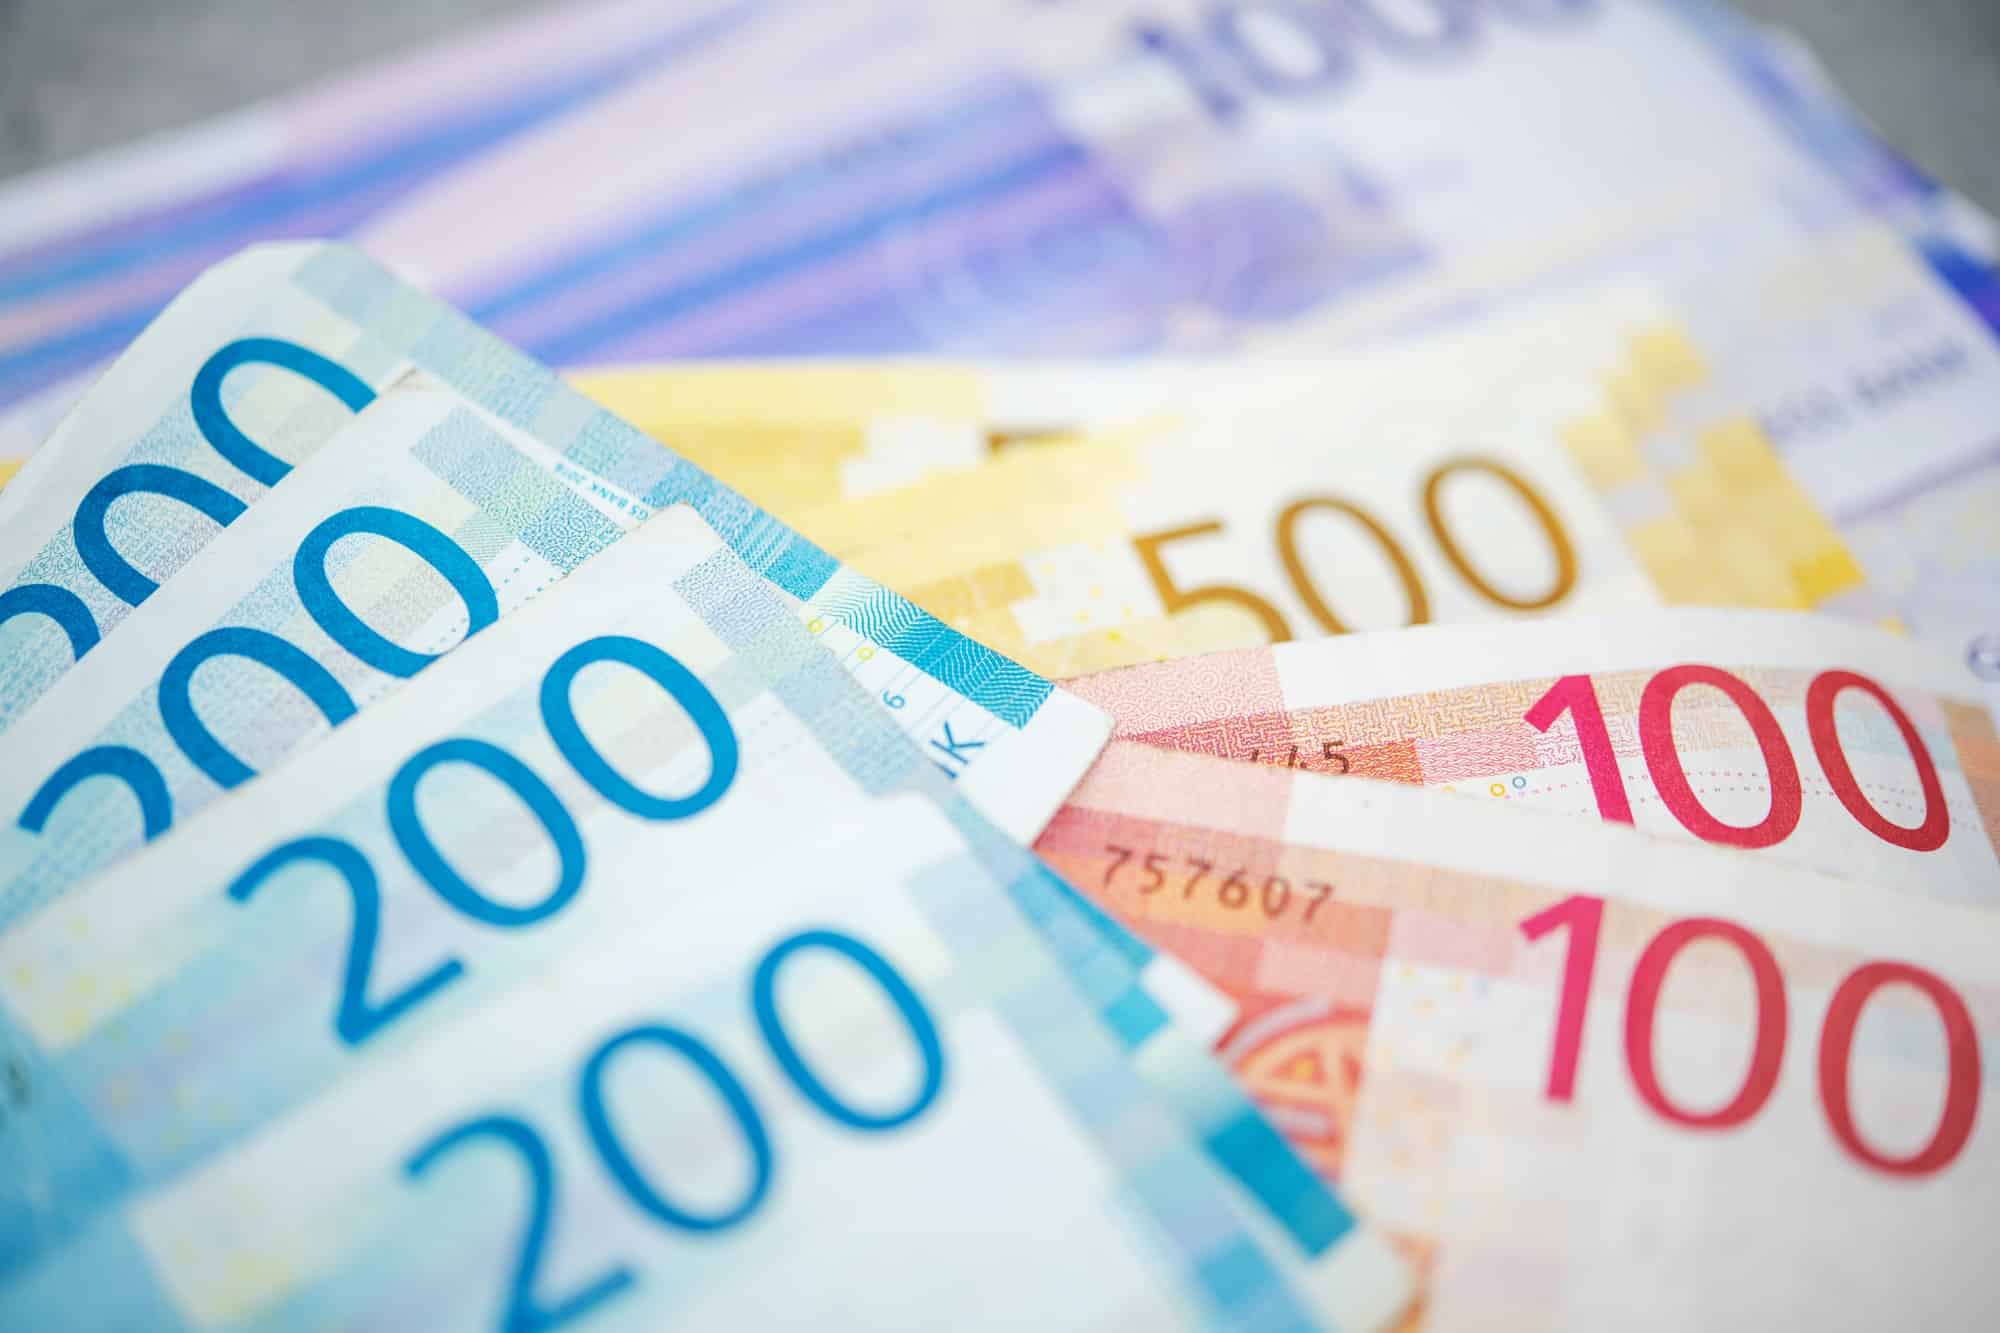 Norwegian Krones Banknotes on a Table